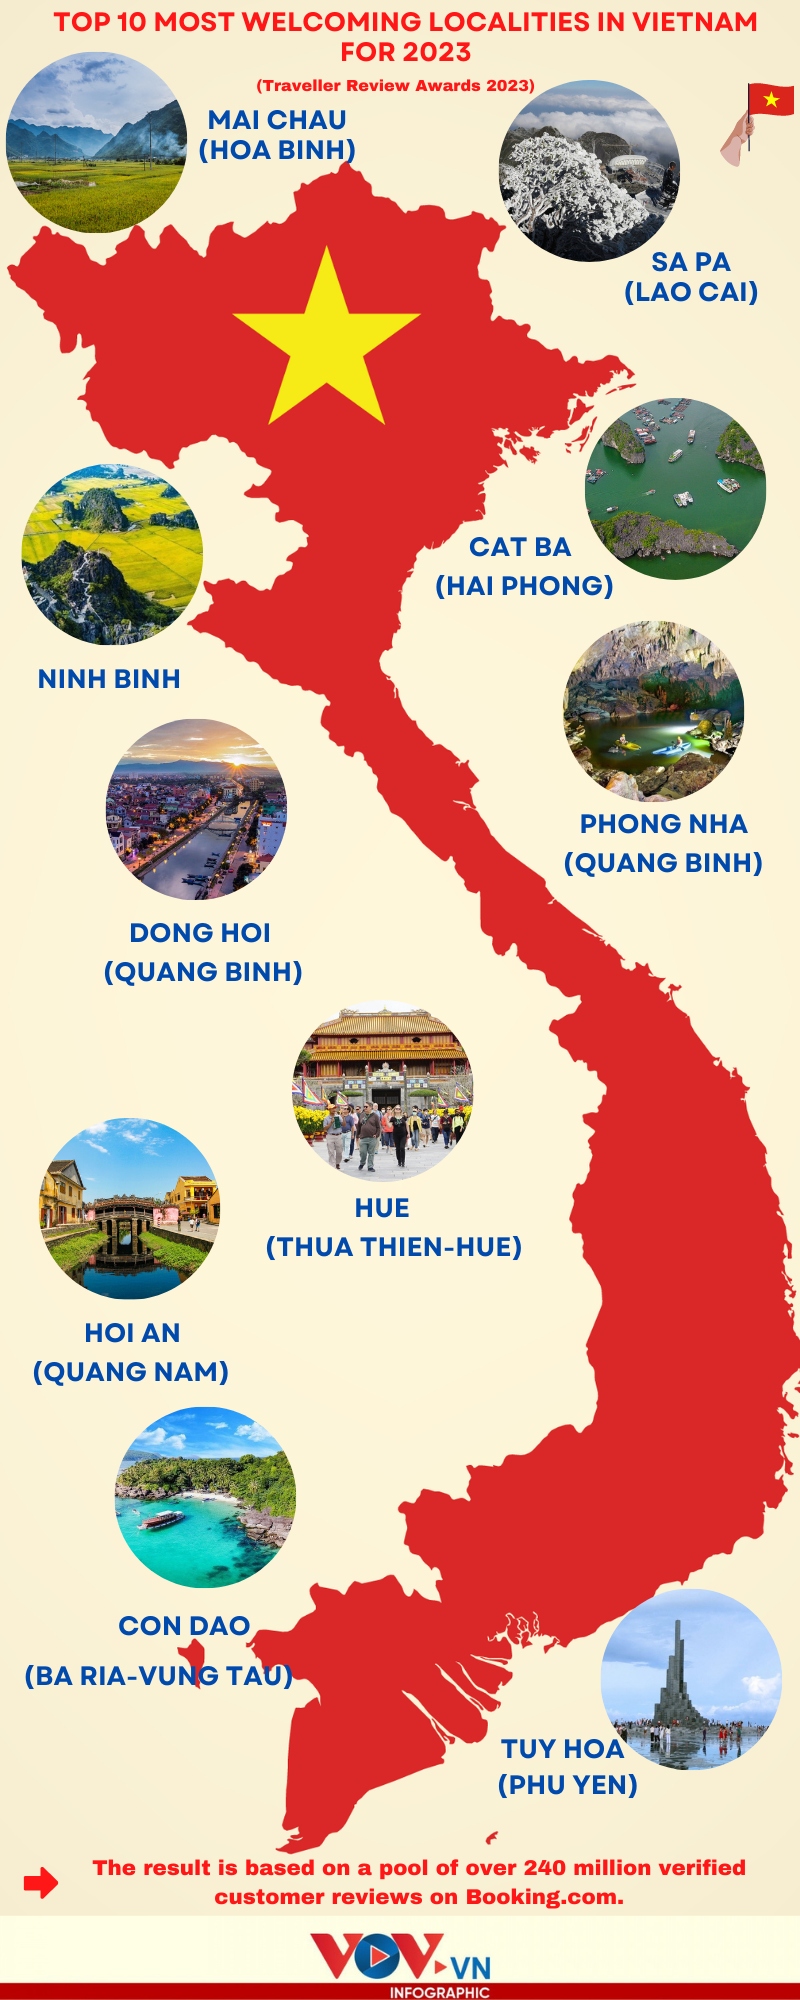 top 10 most welcoming places in vietnam for 2023 announced picture 1